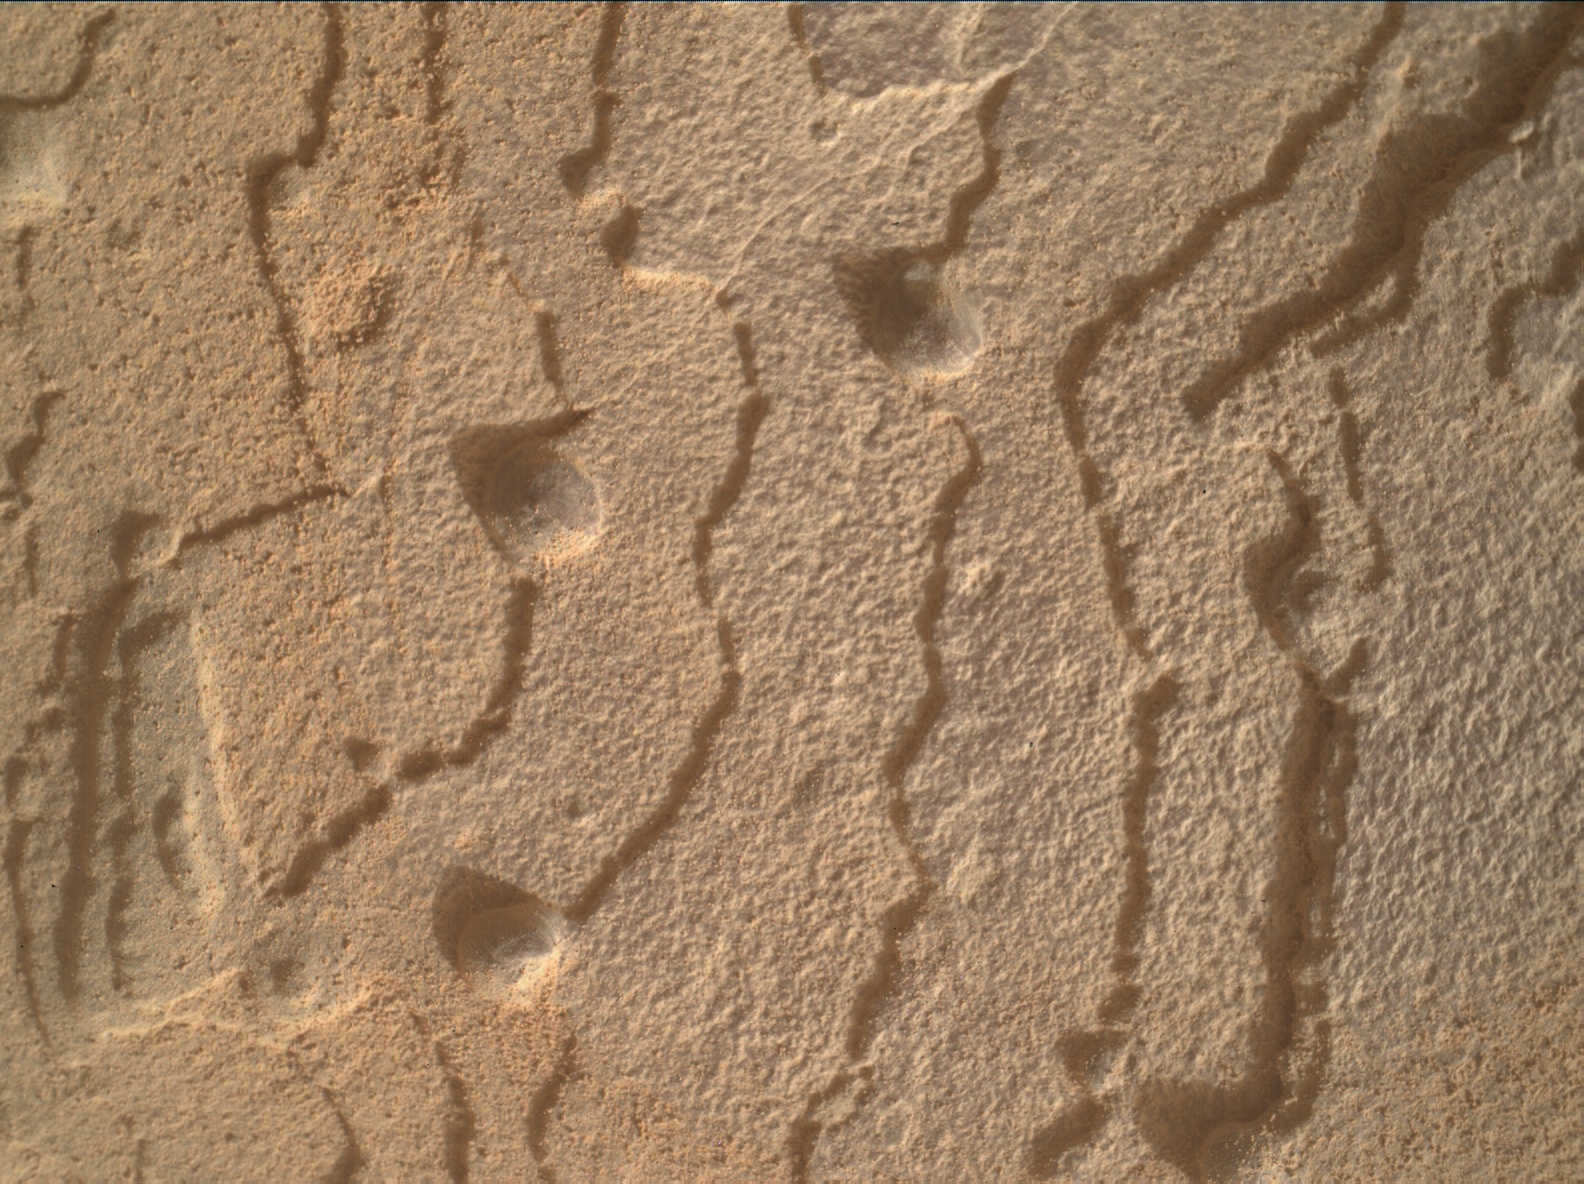 Nasa's Mars rover Curiosity acquired this image using its Mars Hand Lens Imager (MAHLI) on Sol 3609